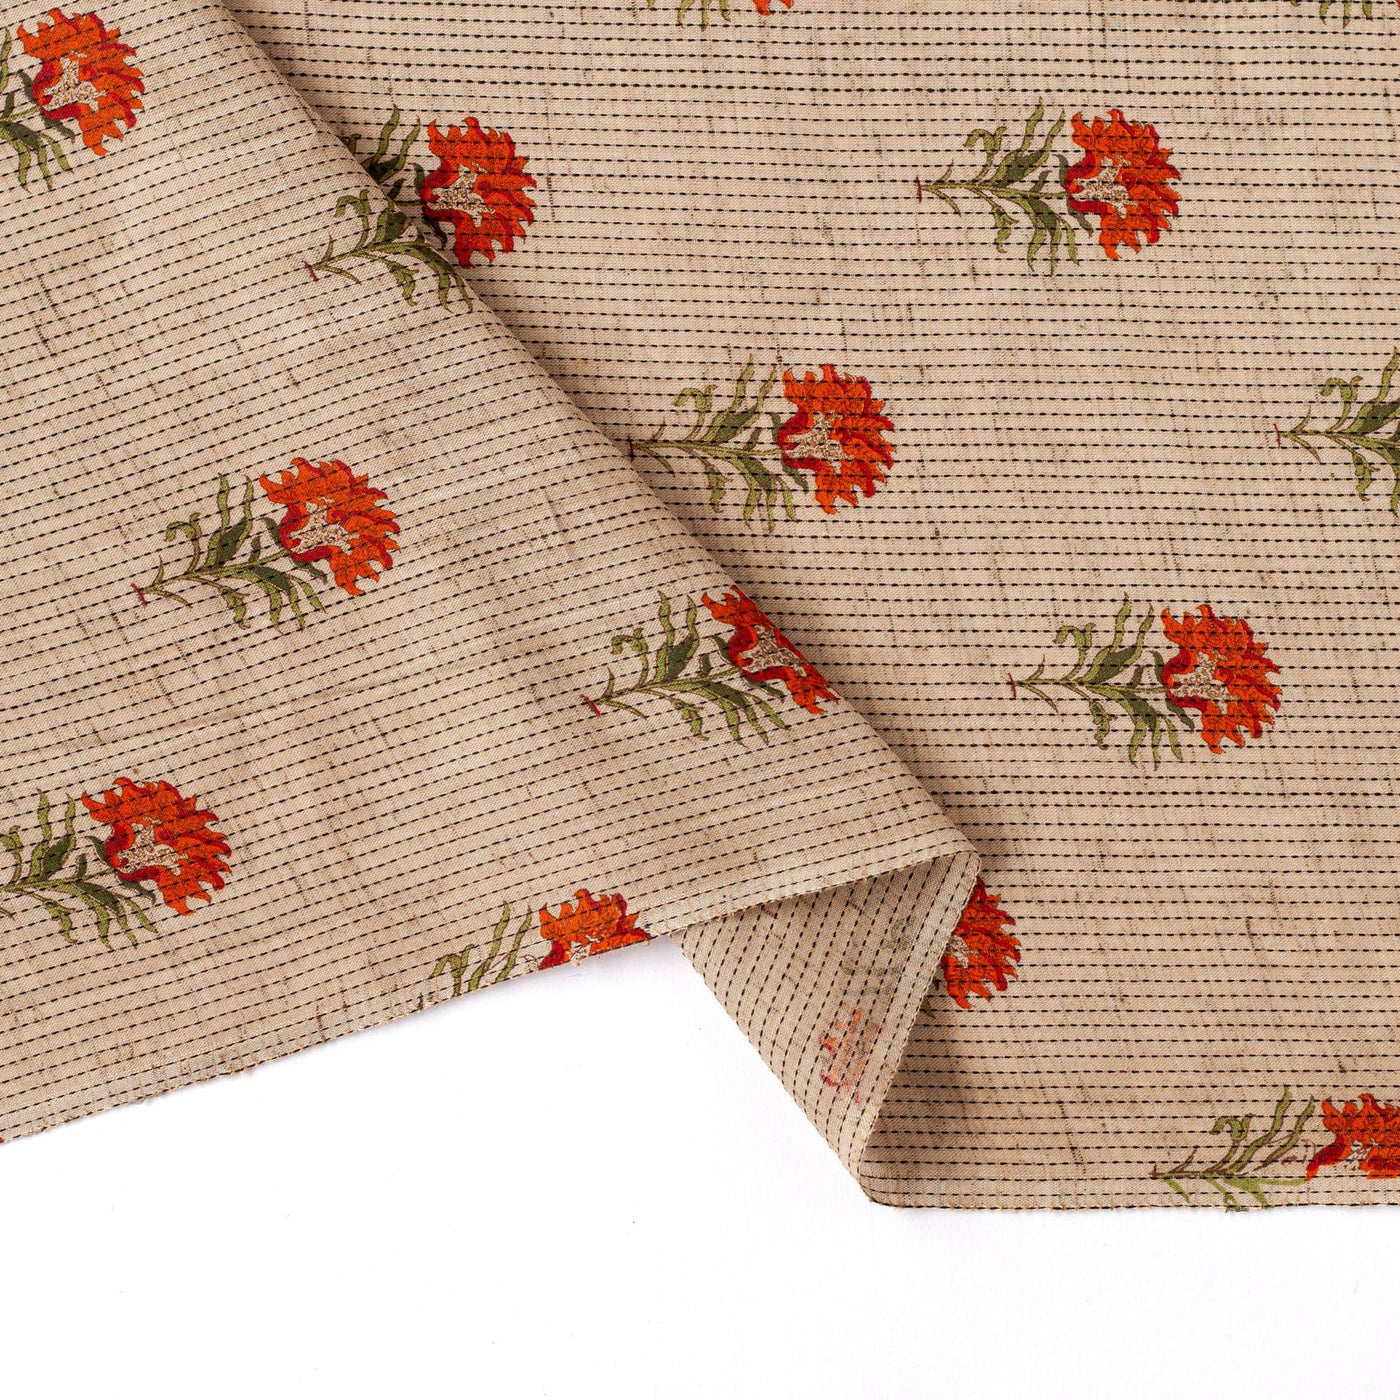 Fabric Pandit Fabric Beige and Orange Floral Woven Kantha Hand Block Printed Pure Cotton Fabric (WIdth 44 Inches)